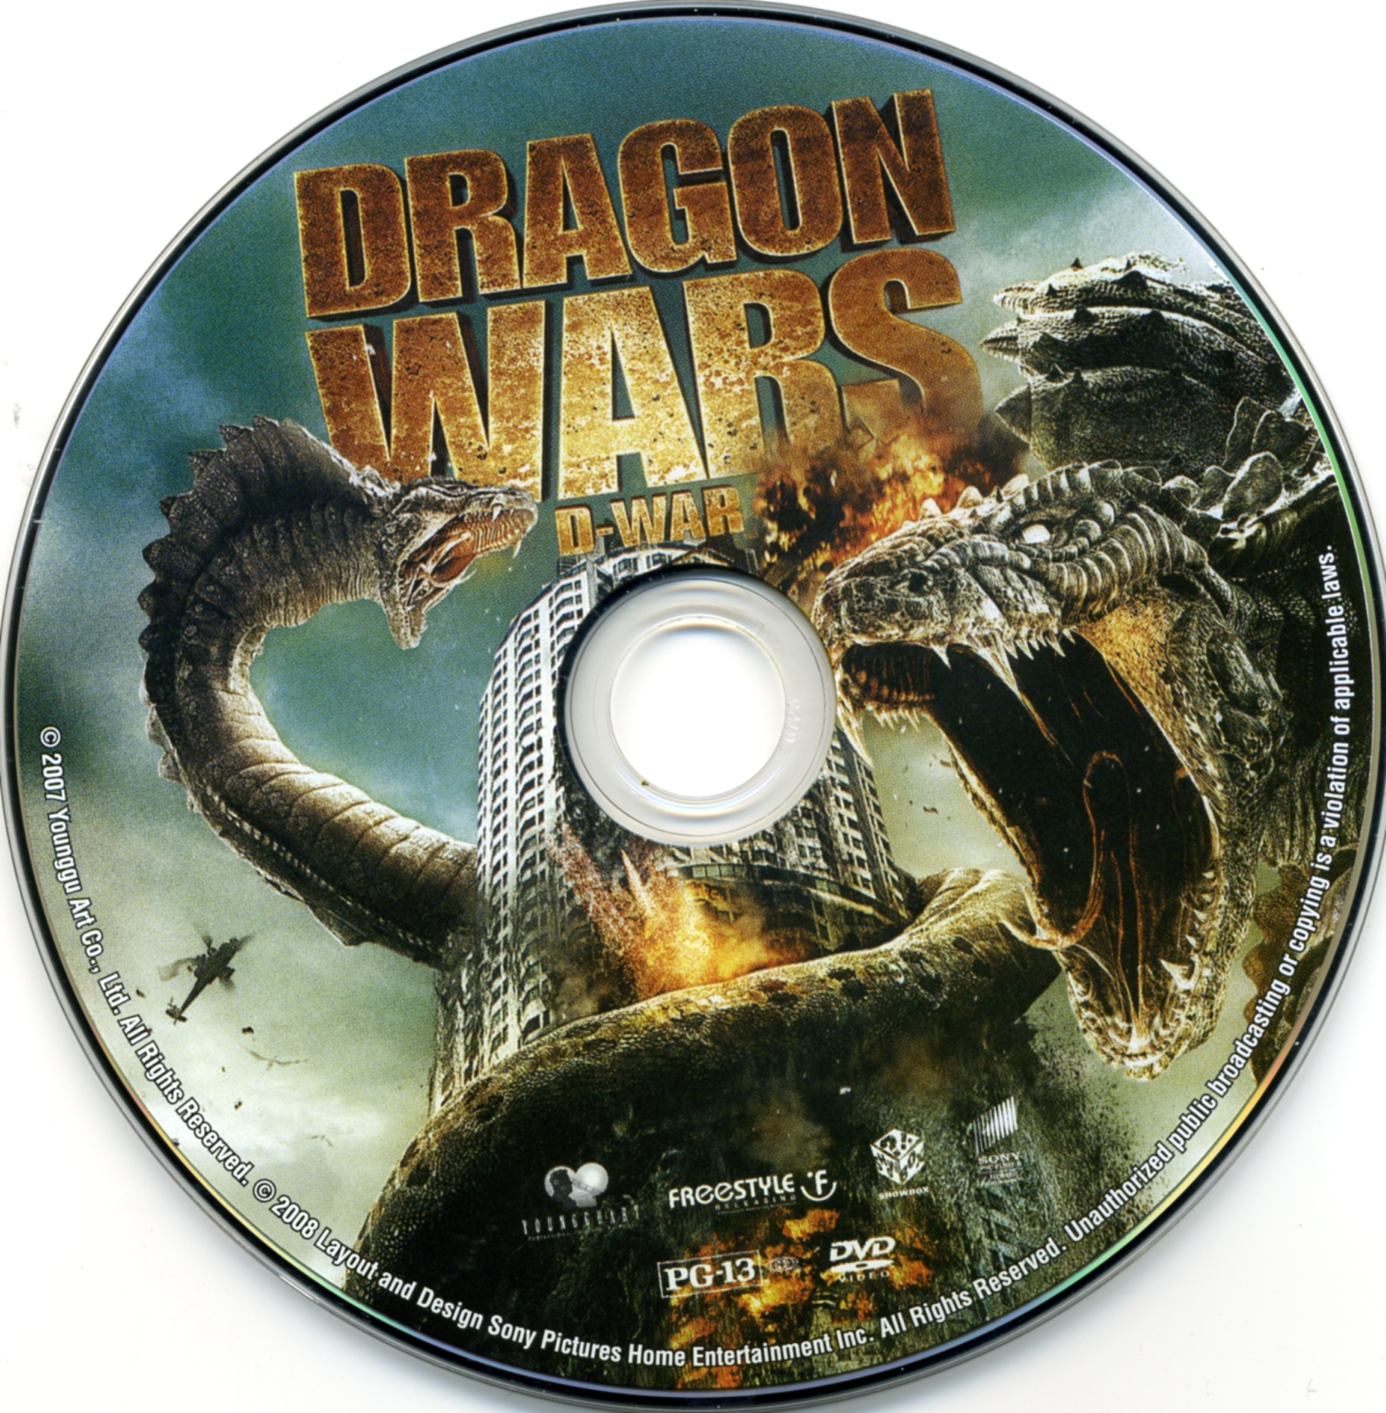 download the last version for ipod Dragon Wars